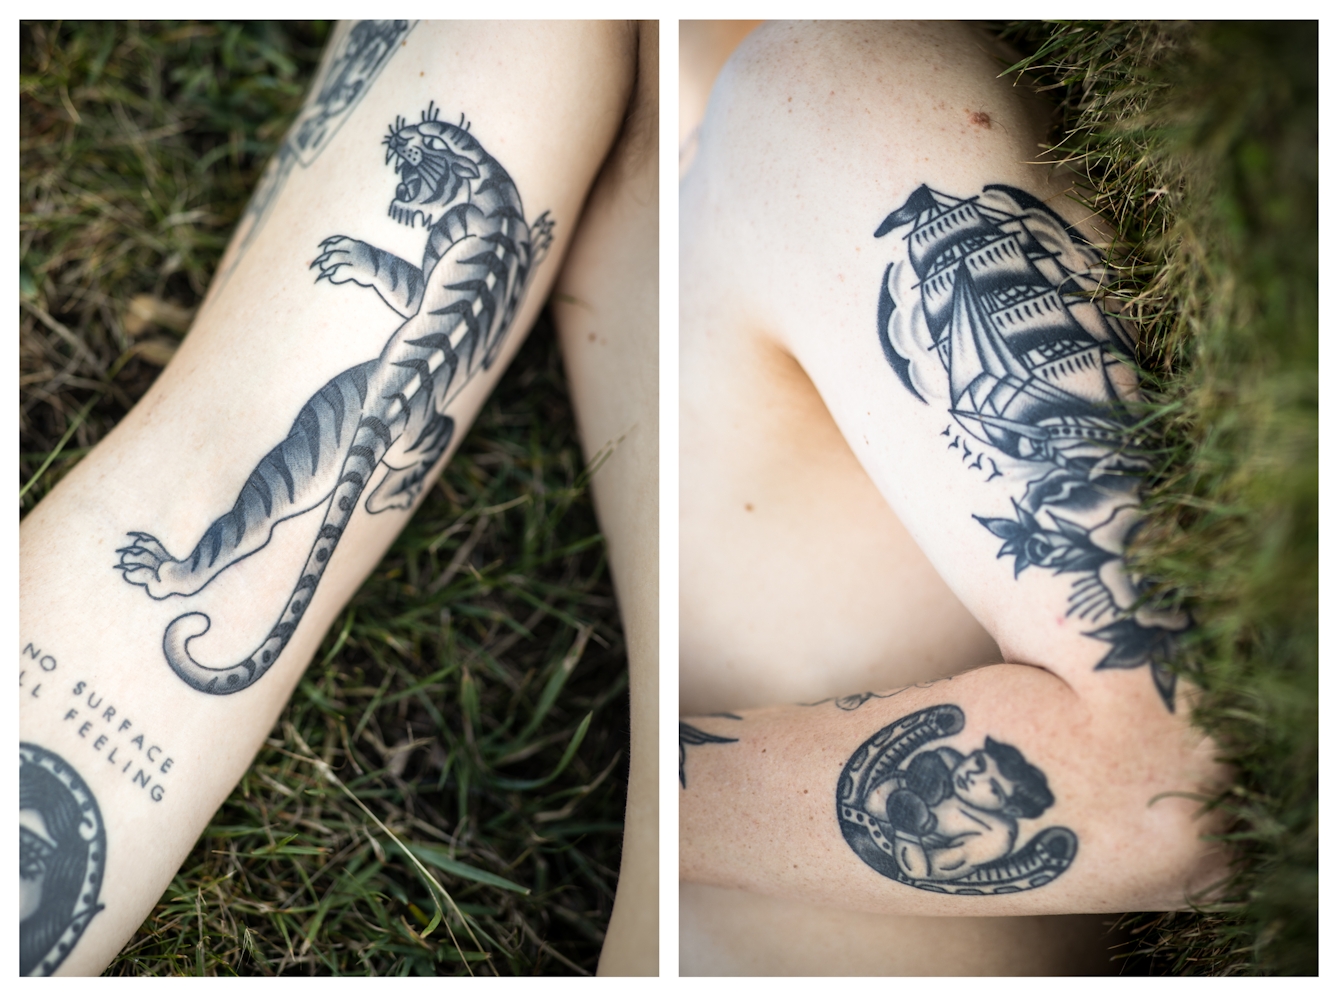 Photographic diptych. Both images show a close-up view of a naked man's tattooed upper body. He is lying on a grass lawn. The image on the left shows the bicep of his right arm on which is a large tattoo of a tiger, teeth bared. The image on the right shows the bicep and upper forearm of his left arm. Over his bicep is a large tattoo of a masted tall ship and on his forearm is a tattoo of a gloved boxer resting inside a large horseshoe.